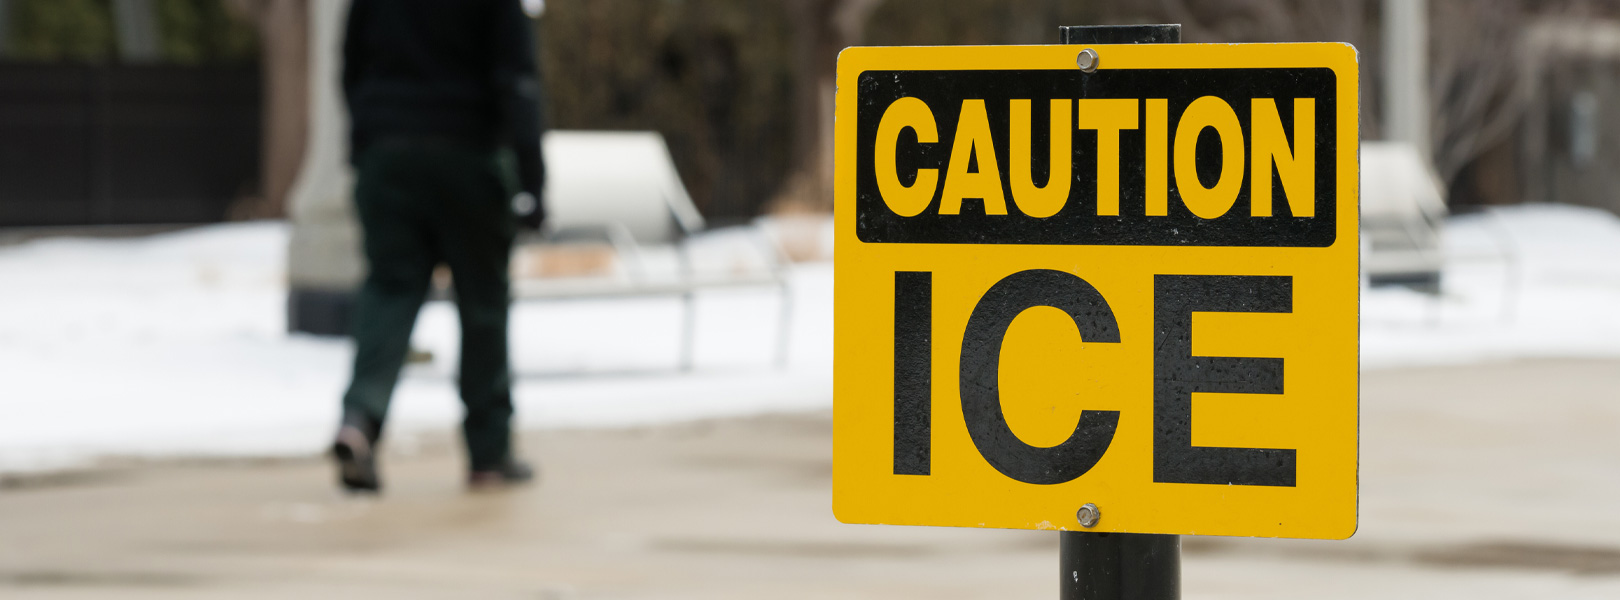 "CAUTION ICE" sign and man walking on sidewalk in the distance